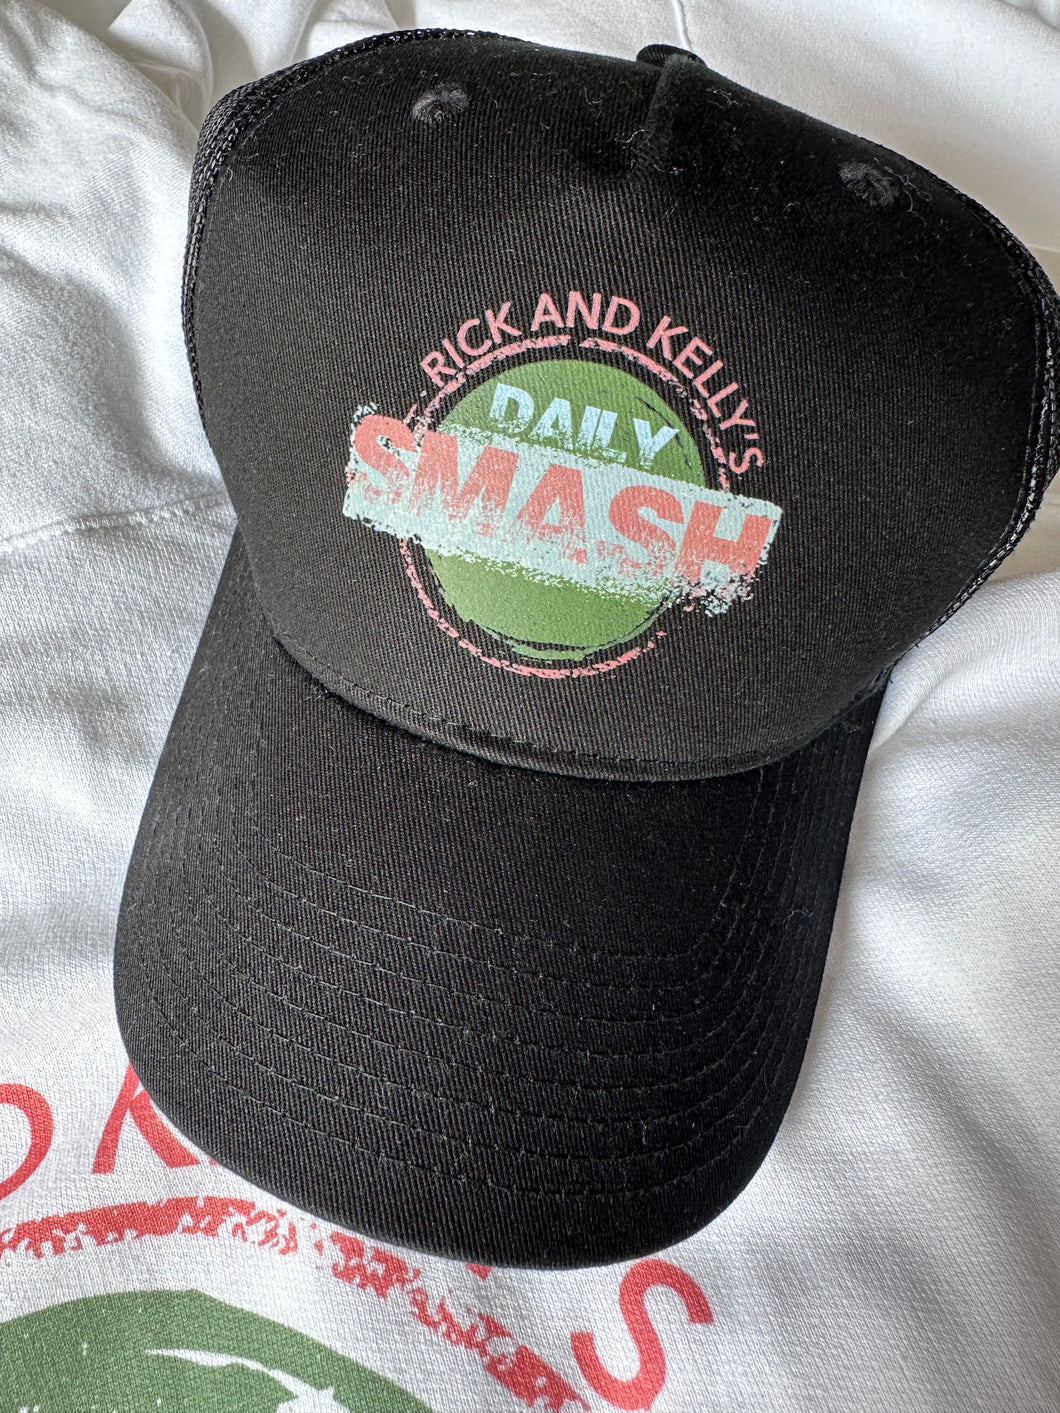 THE DAILY SMASH HAT